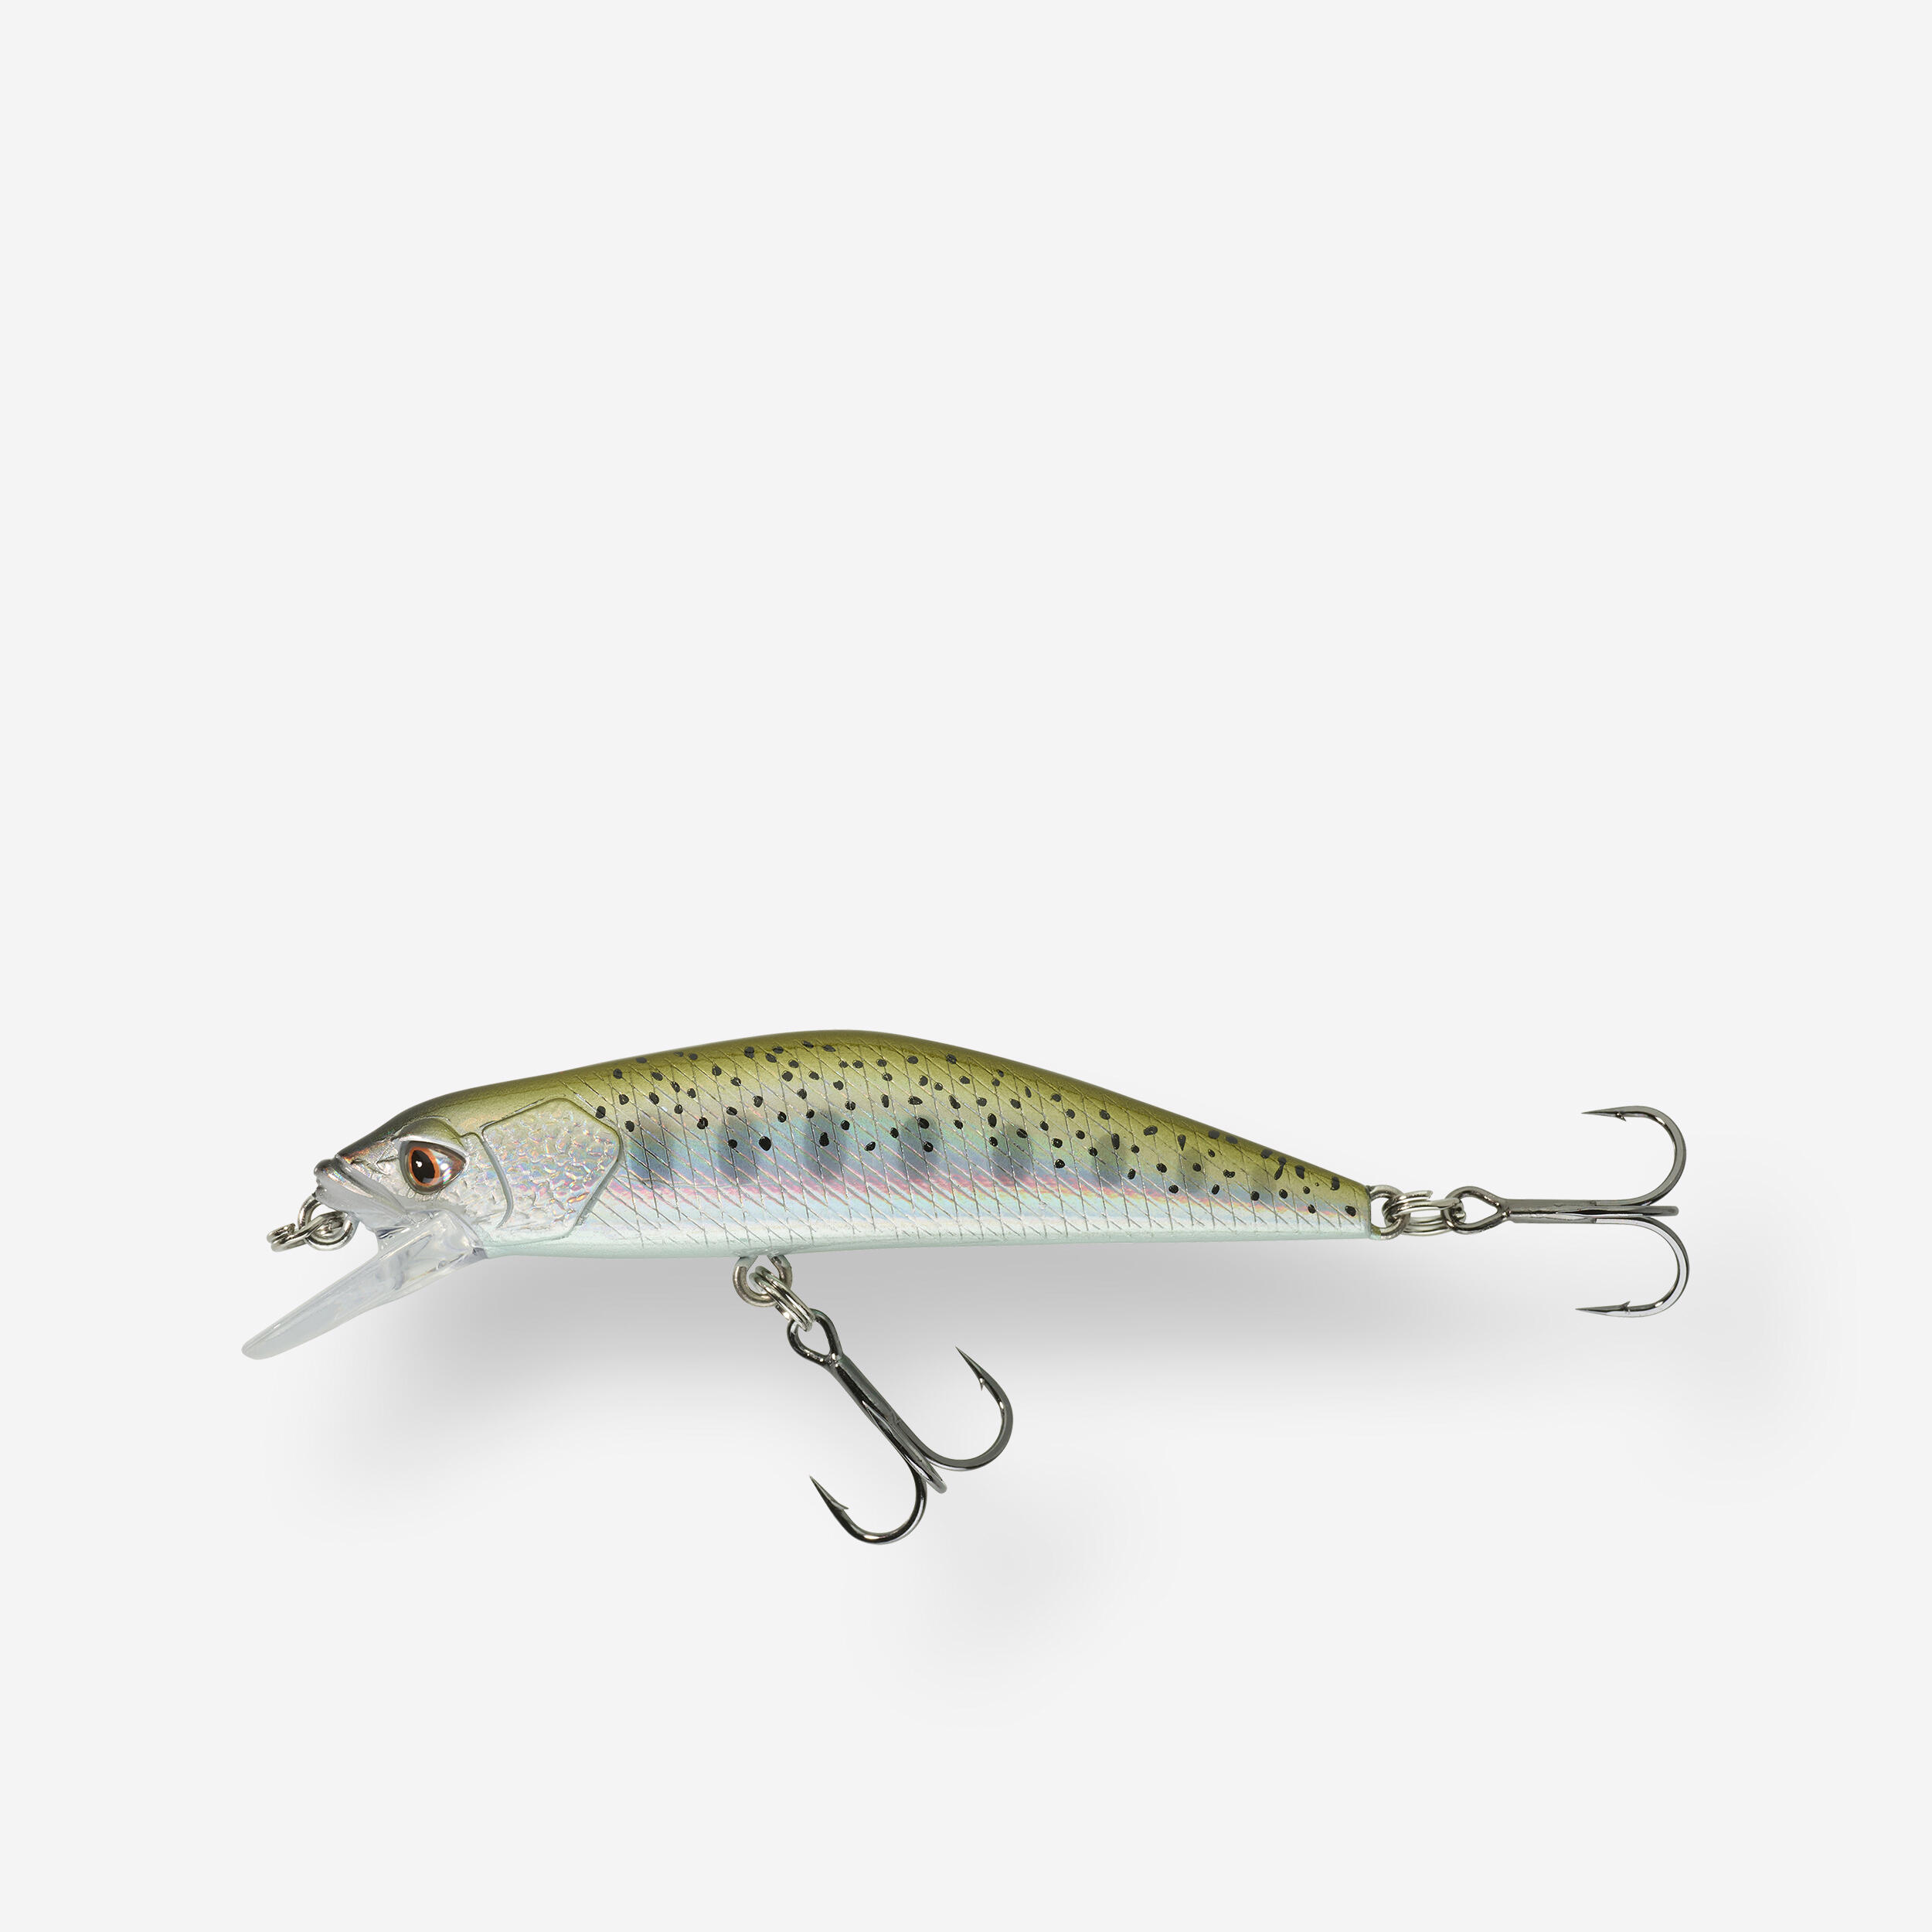 CAPERLAN MINNOW HARD LURE FOR TROUT MNWFS US 70 YAMAME